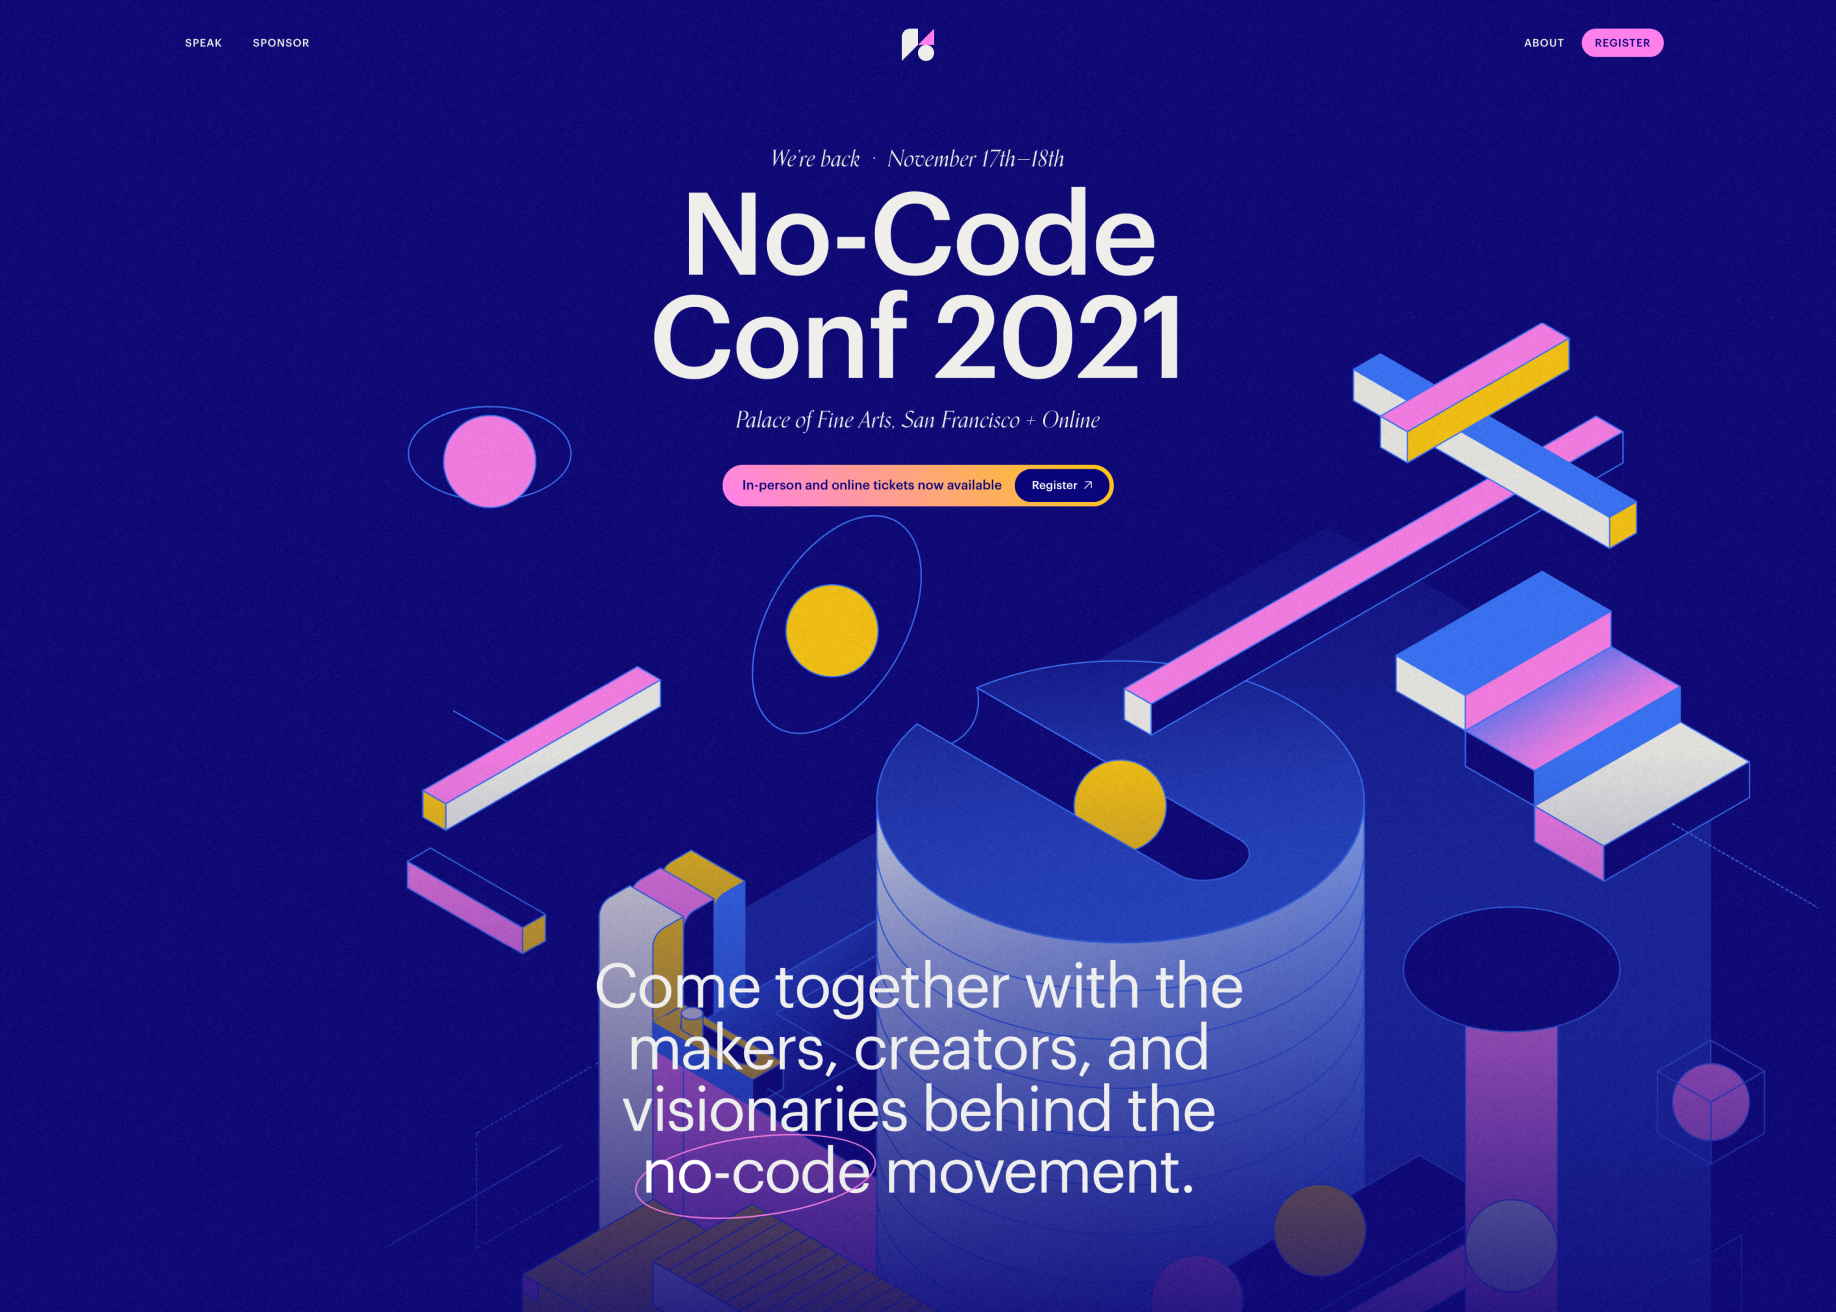 The shift to make No-Code Conf 2021 an online-only event